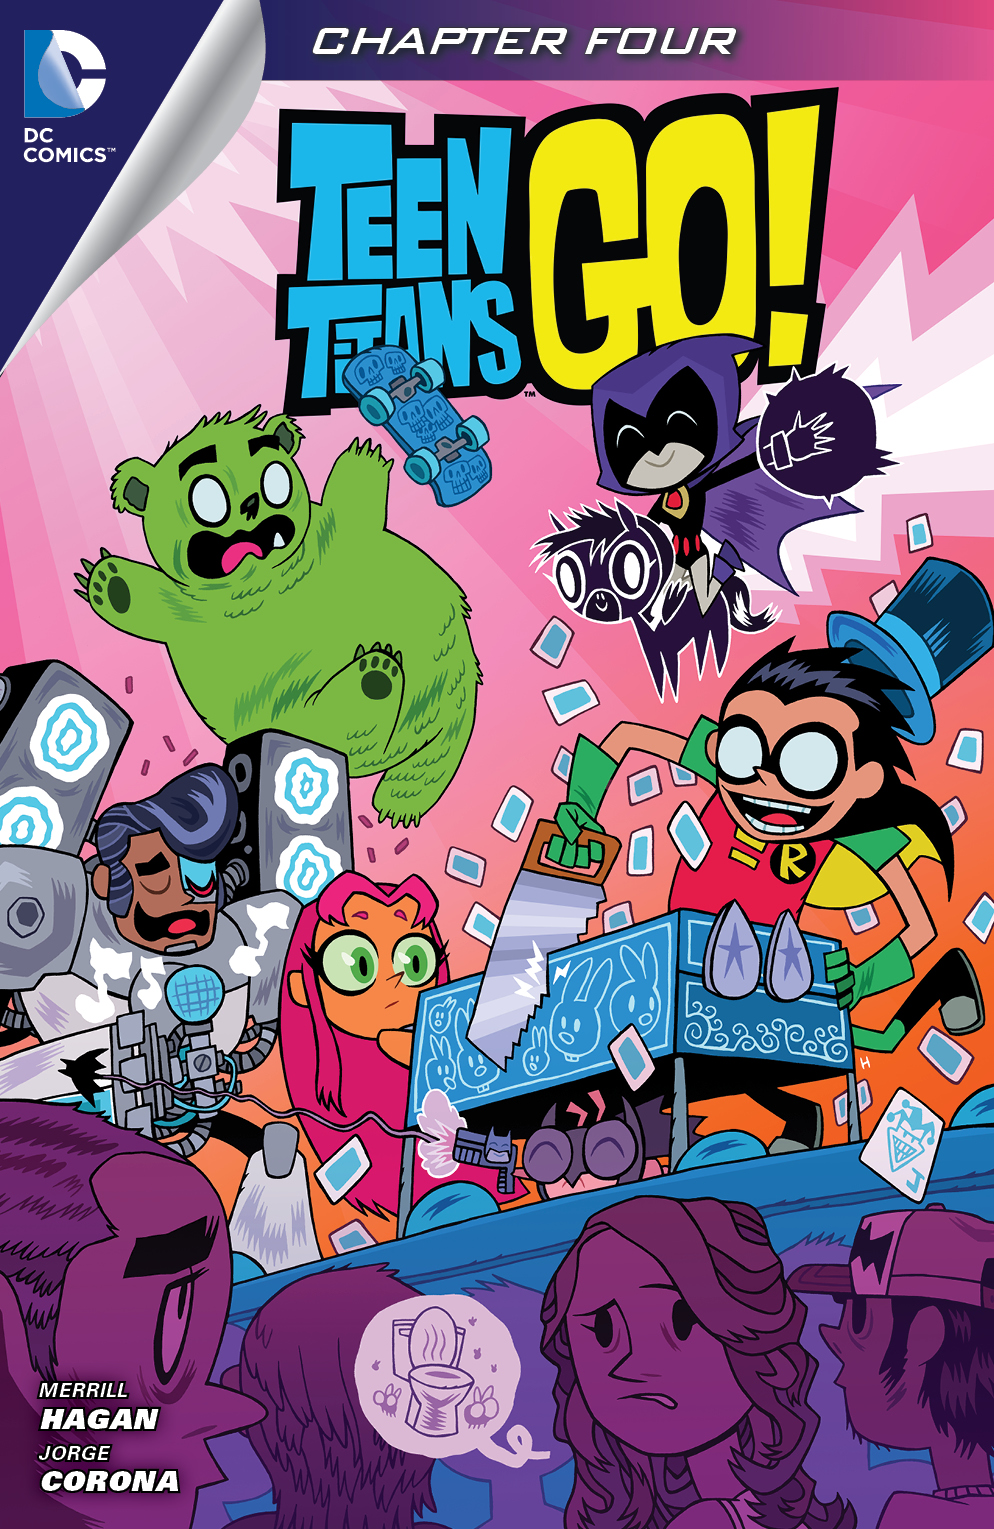 Teen Titans Go! (2013-) #4 preview images